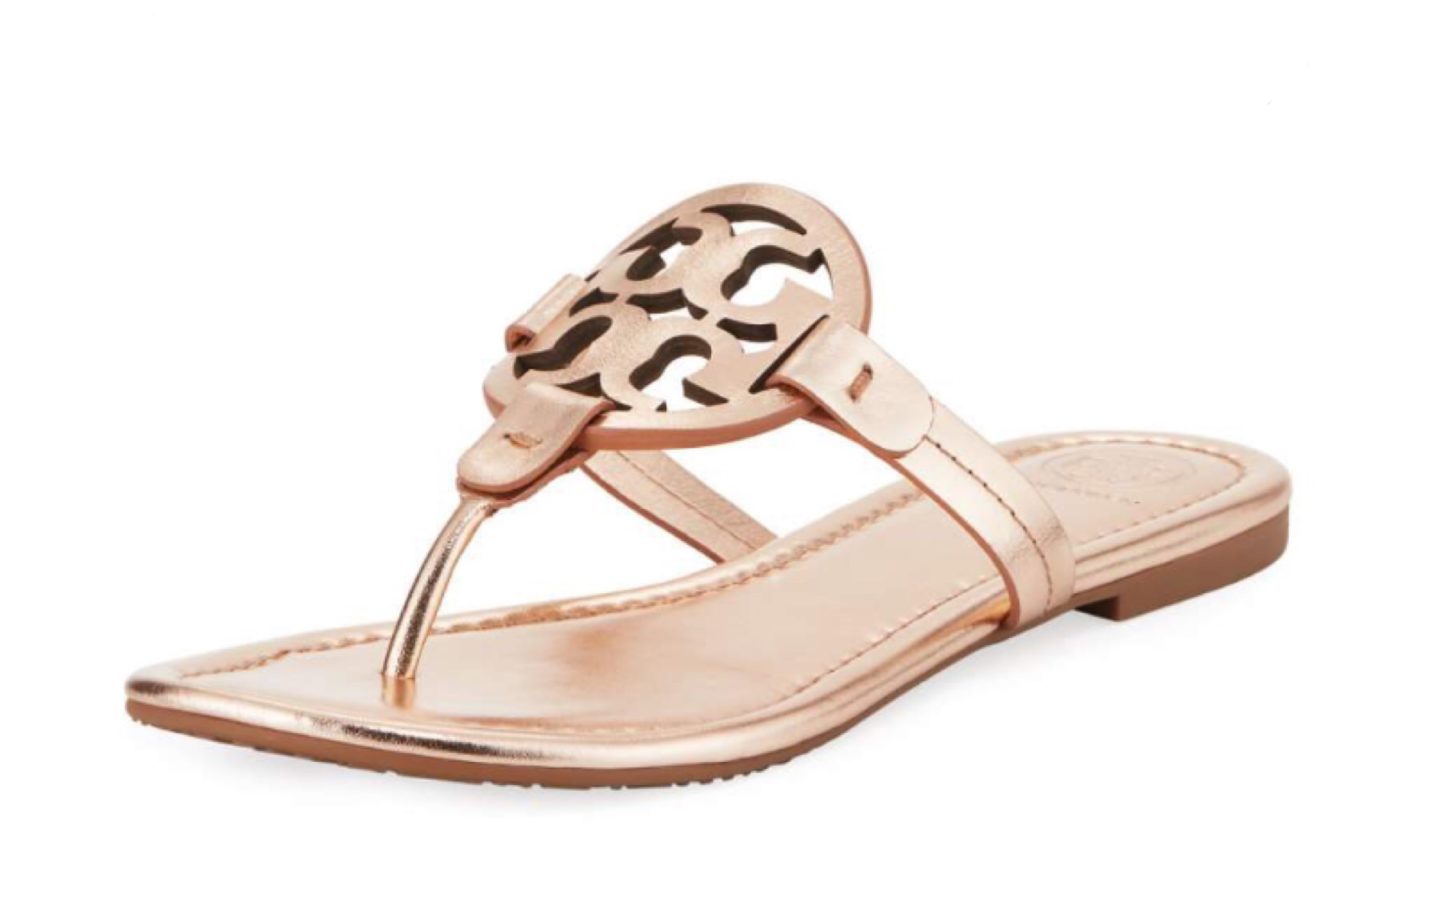 Tory Burch Promo Today Only! - The Double Take Girls